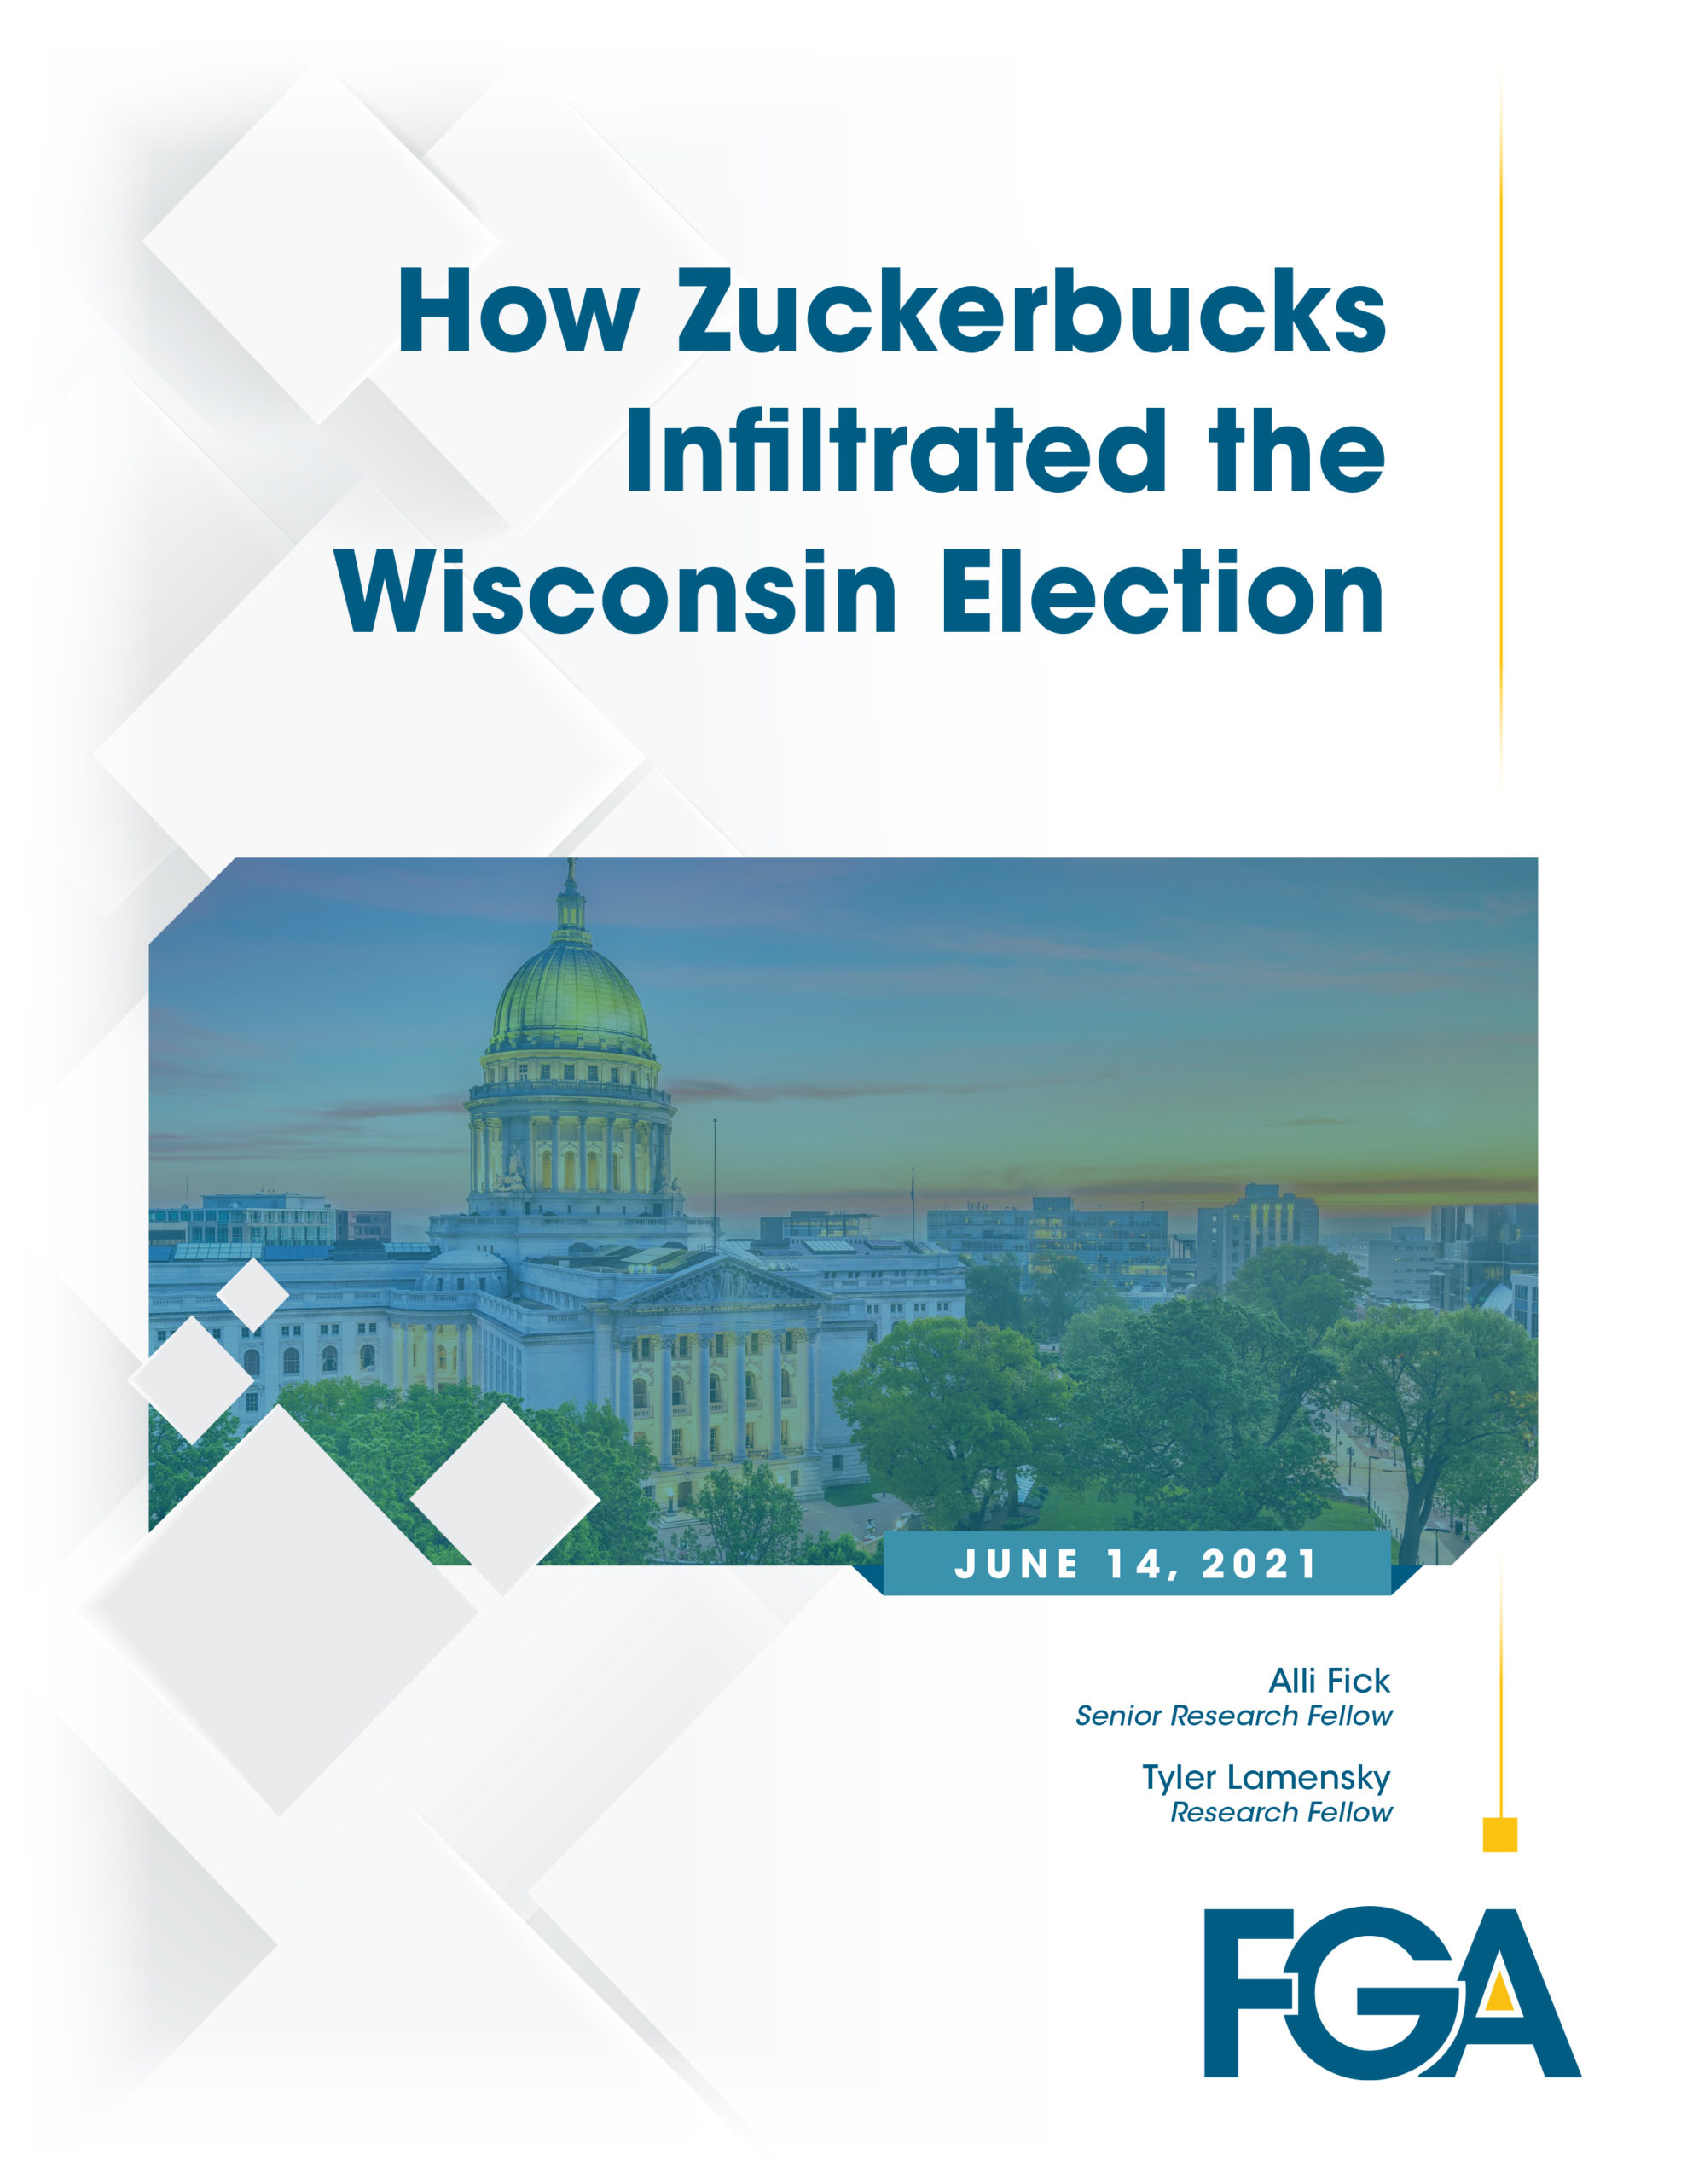 How Zuckerbucks Infiltrated the Wisconsin Election